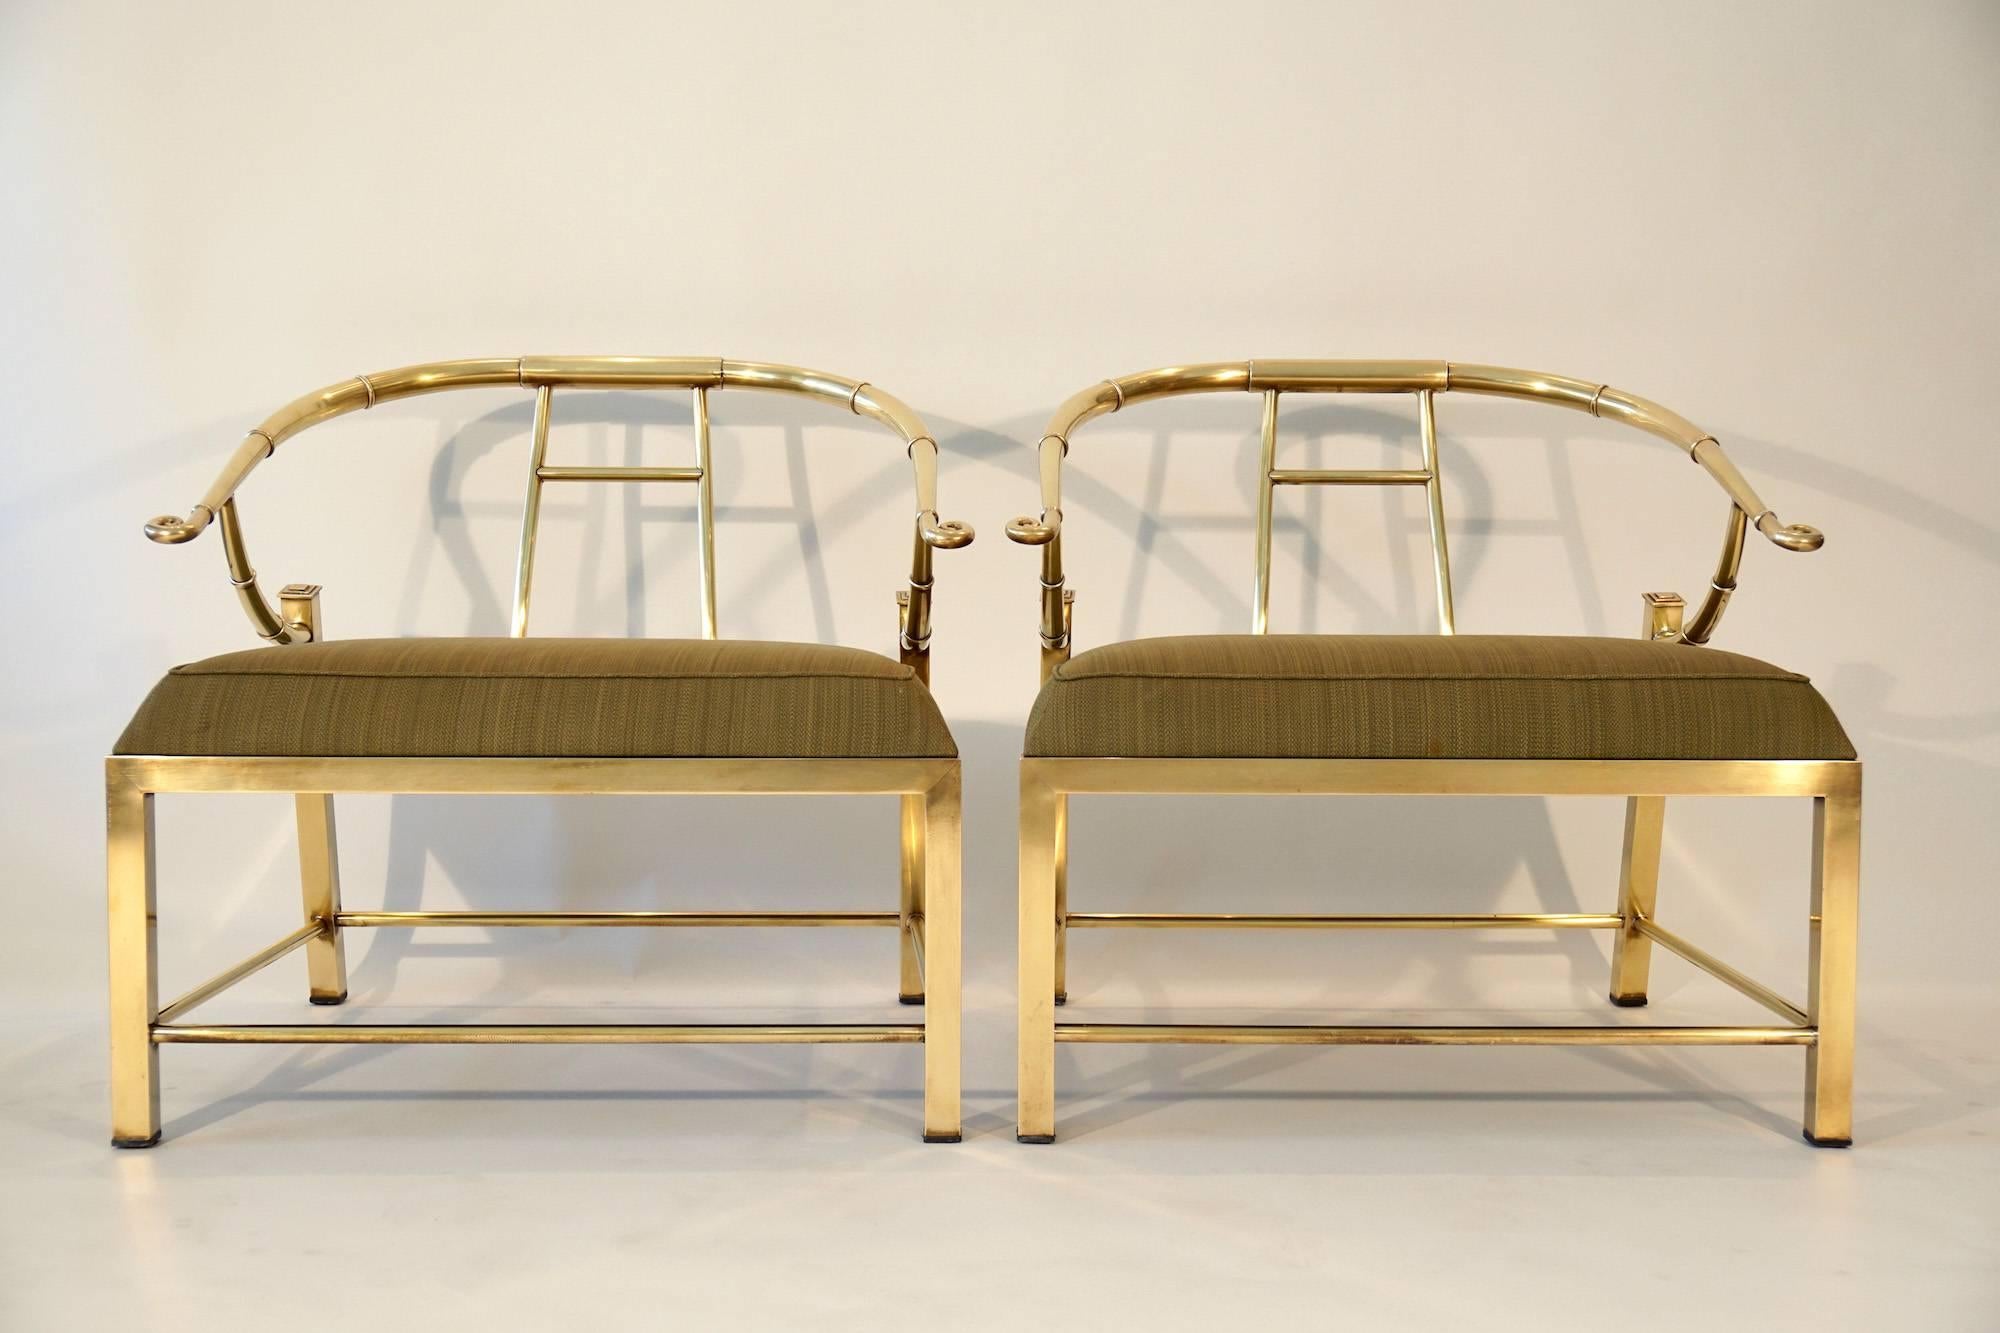 Pair of brass lounge chairs produced in Italy for Mastercraft furniture. The unlacquered brass has a beautiful bright patina.